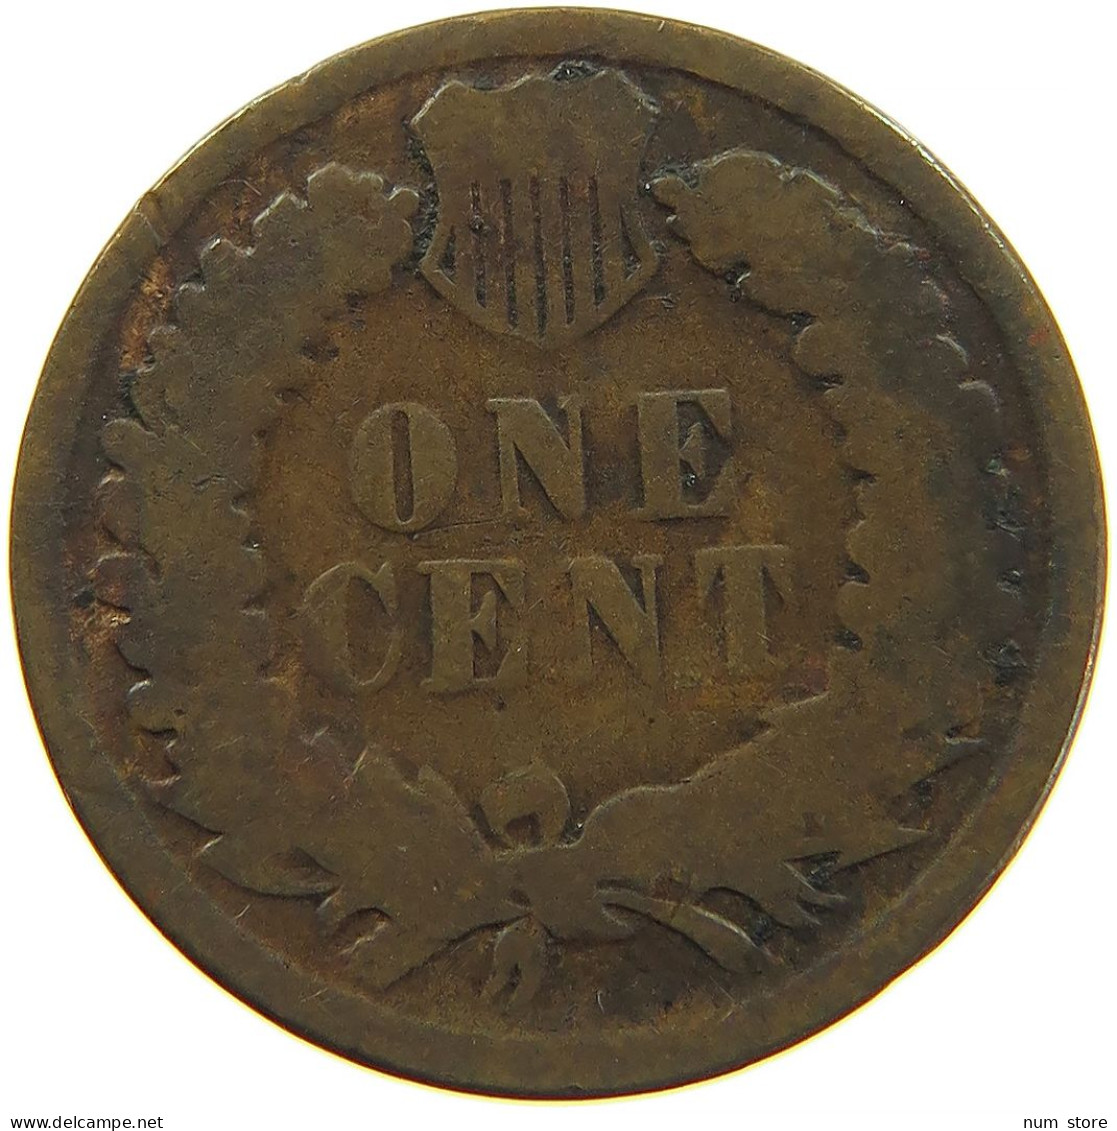 UNITED STATES OF AMERICA CENT 1882 INDIAN HEAD #s091 0395 - 1859-1909: Indian Head